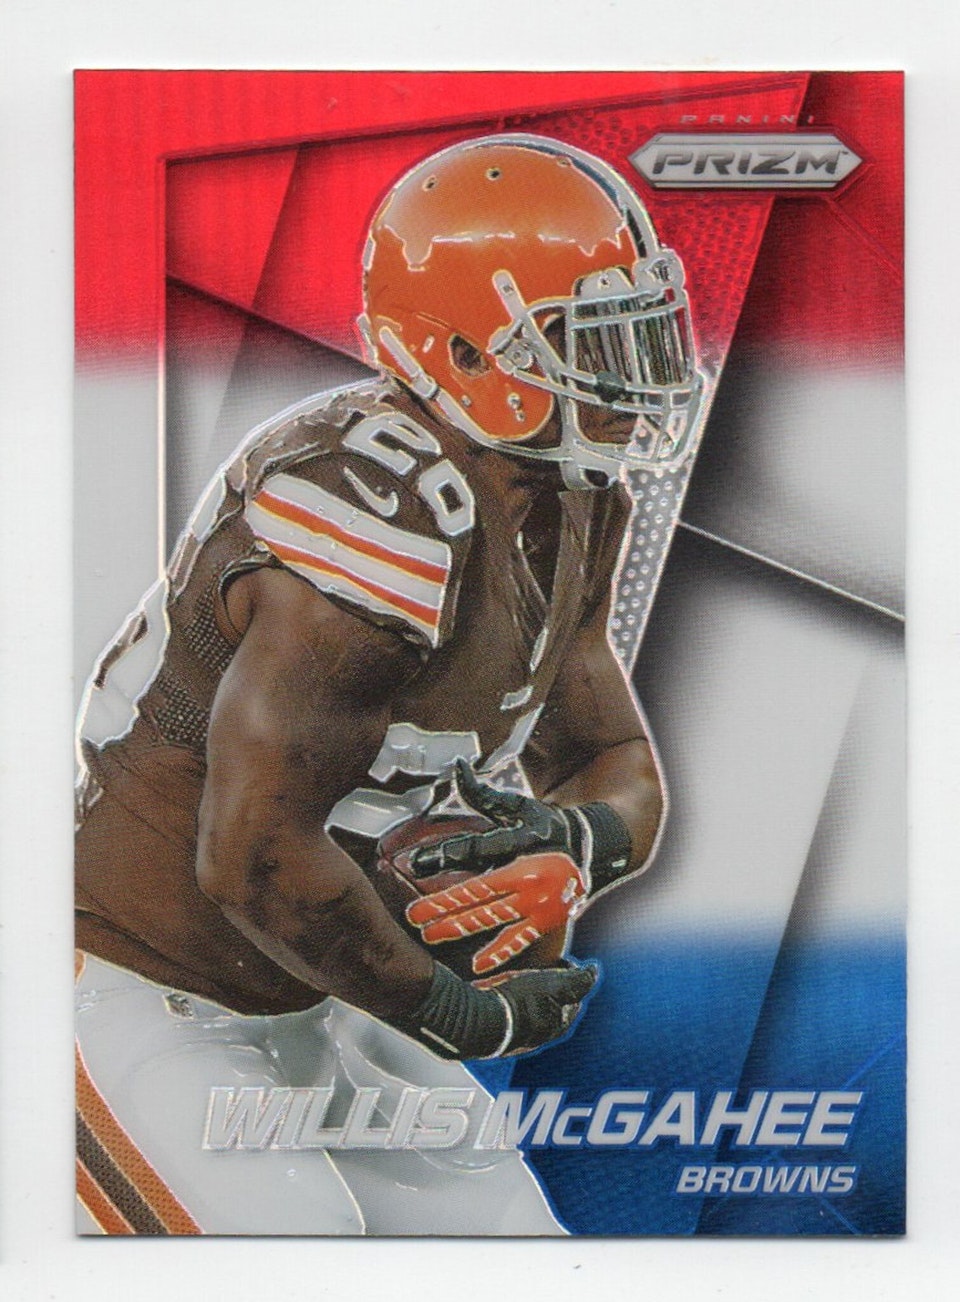 2014 Panini Prizm Prizms Red White and Blue #158 Willis McGahee (25-X256-NFLBROWNS)